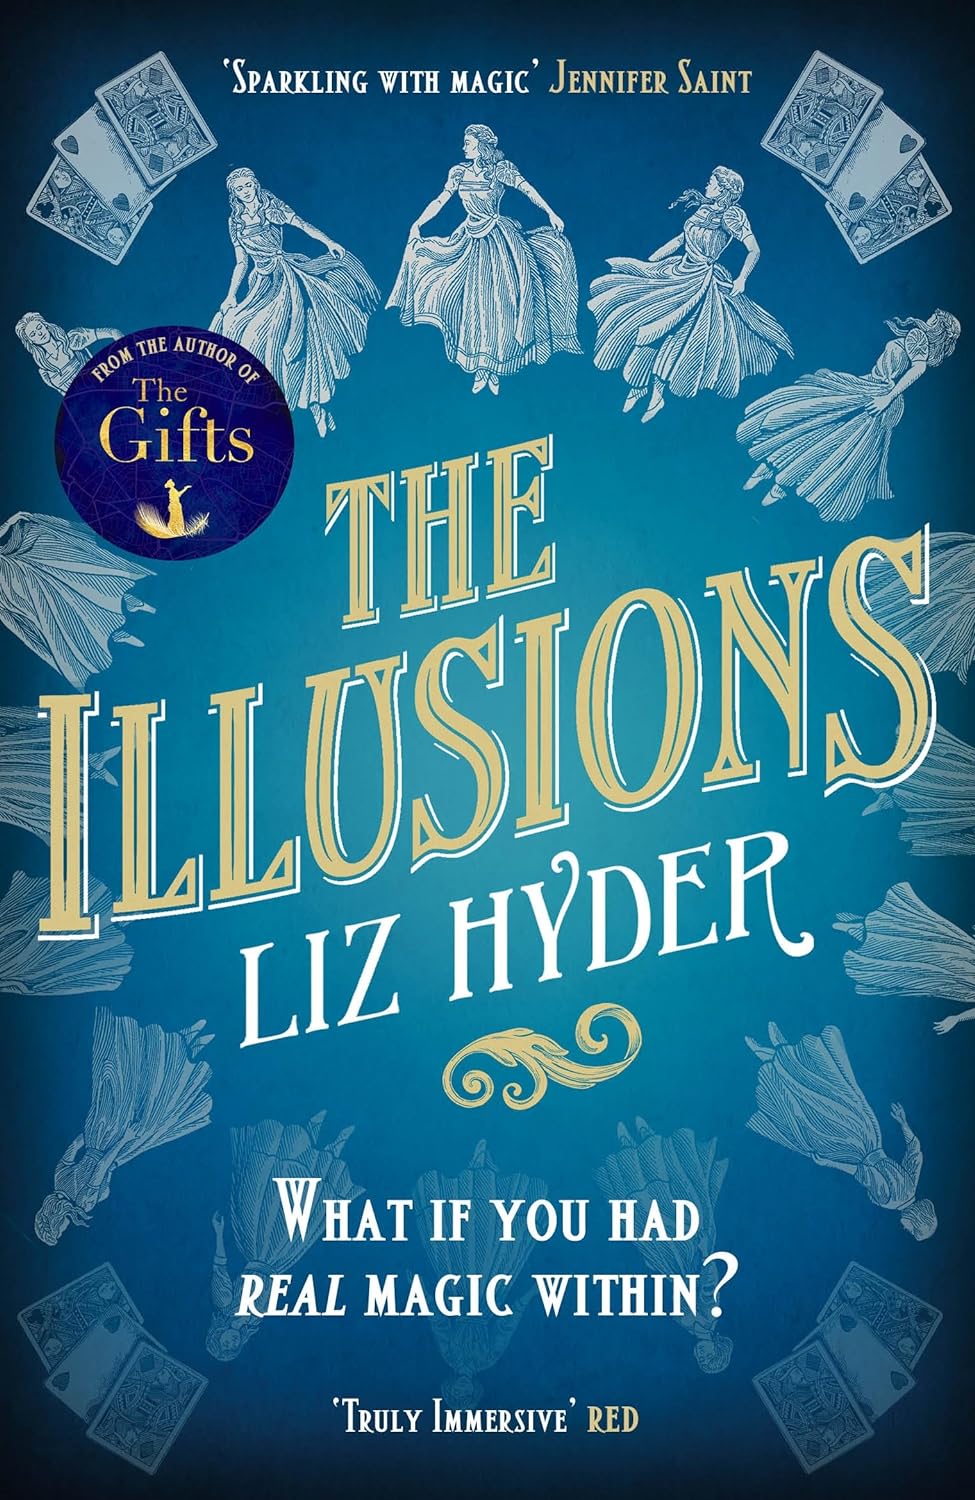 Blue book cover with repeated images of a woman in a white dress and playing cards. Text reads ' The Illusions''Liz Hyder''What if you had real magic within?'